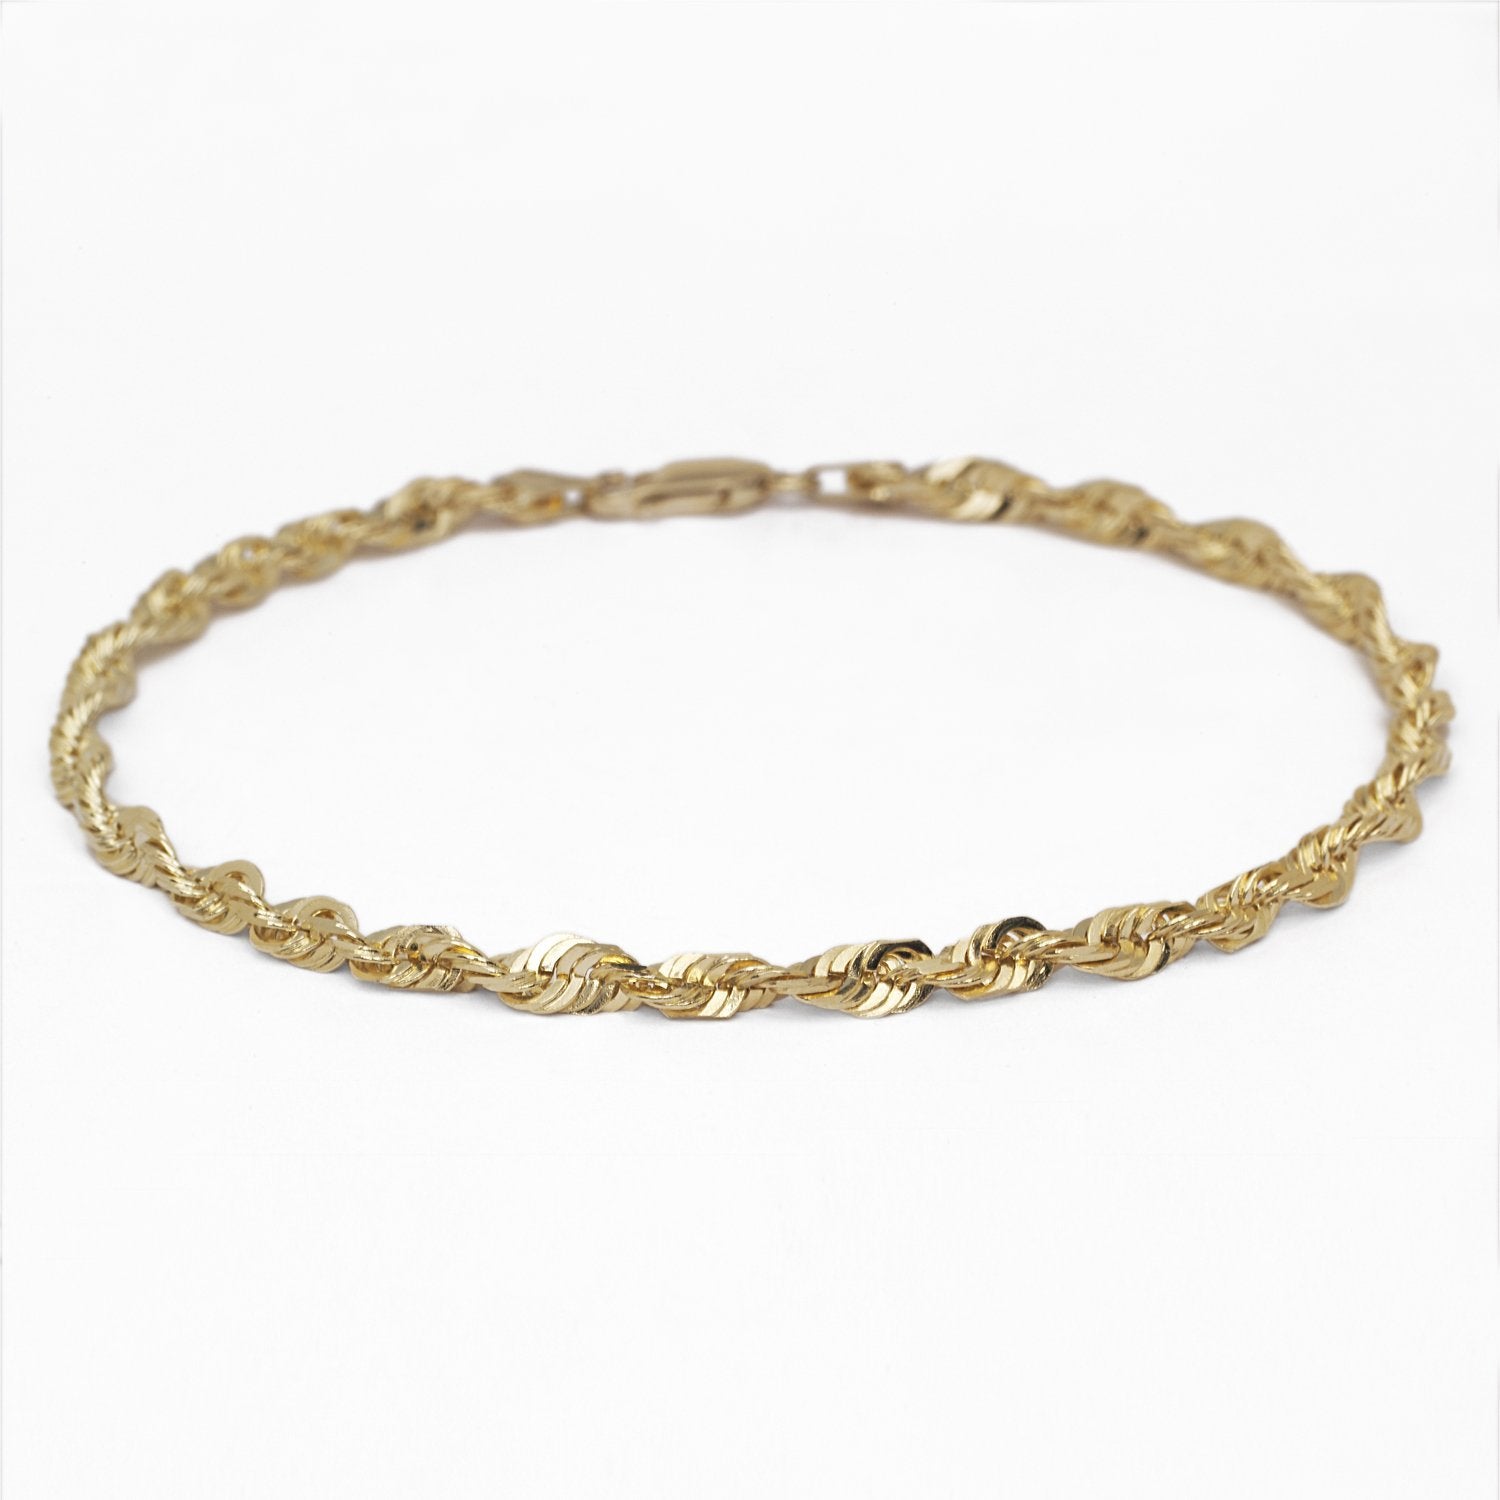 10k Yellow Gold Solid Diamond Cut Rope Chain Bracelet and Anklet, 3mm